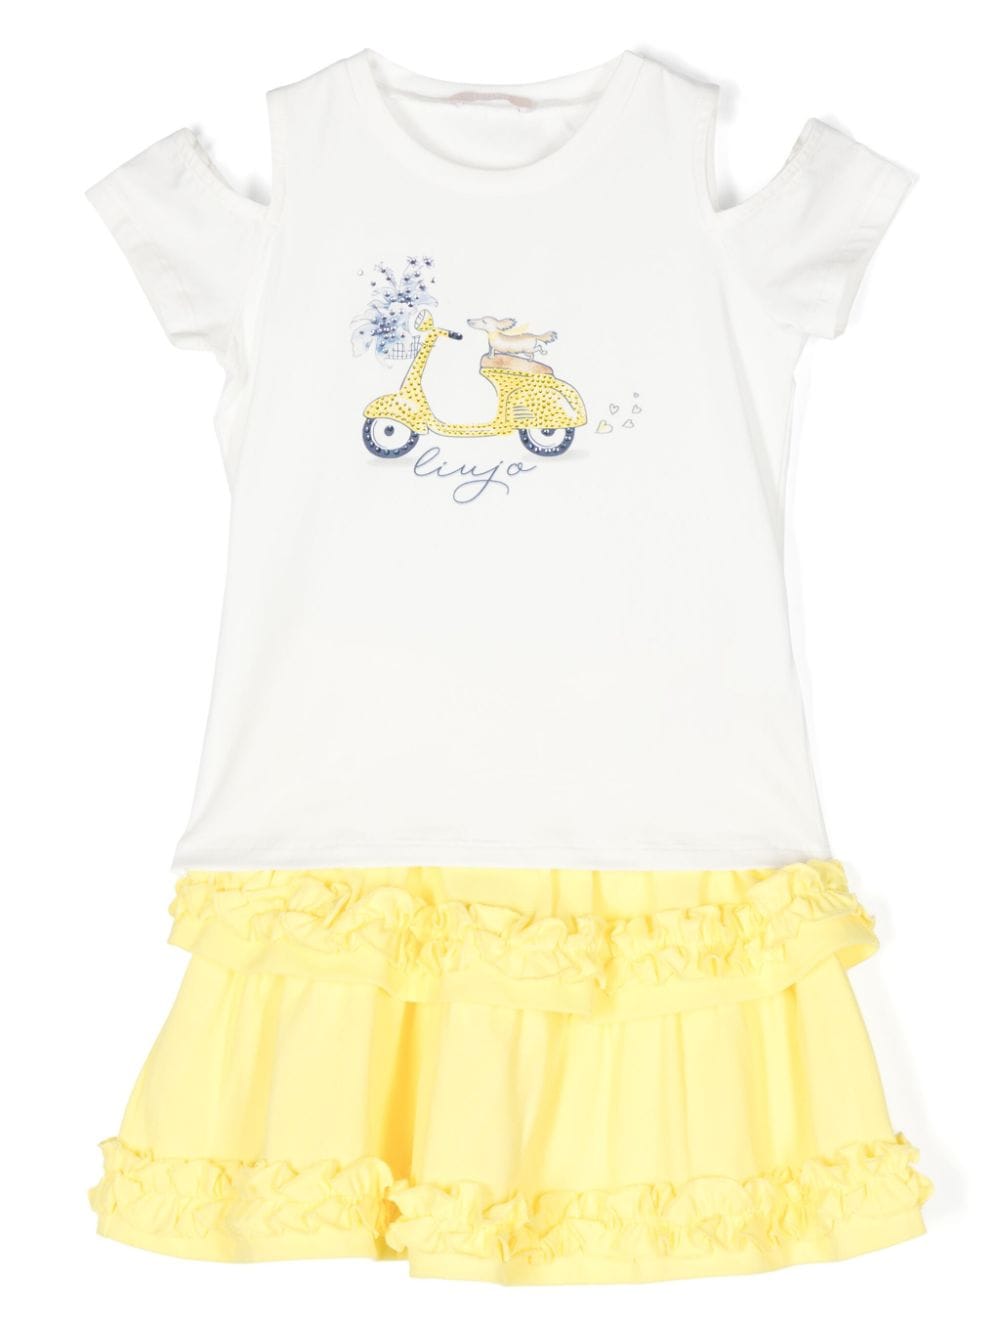 White and yellow sports outfit for girls